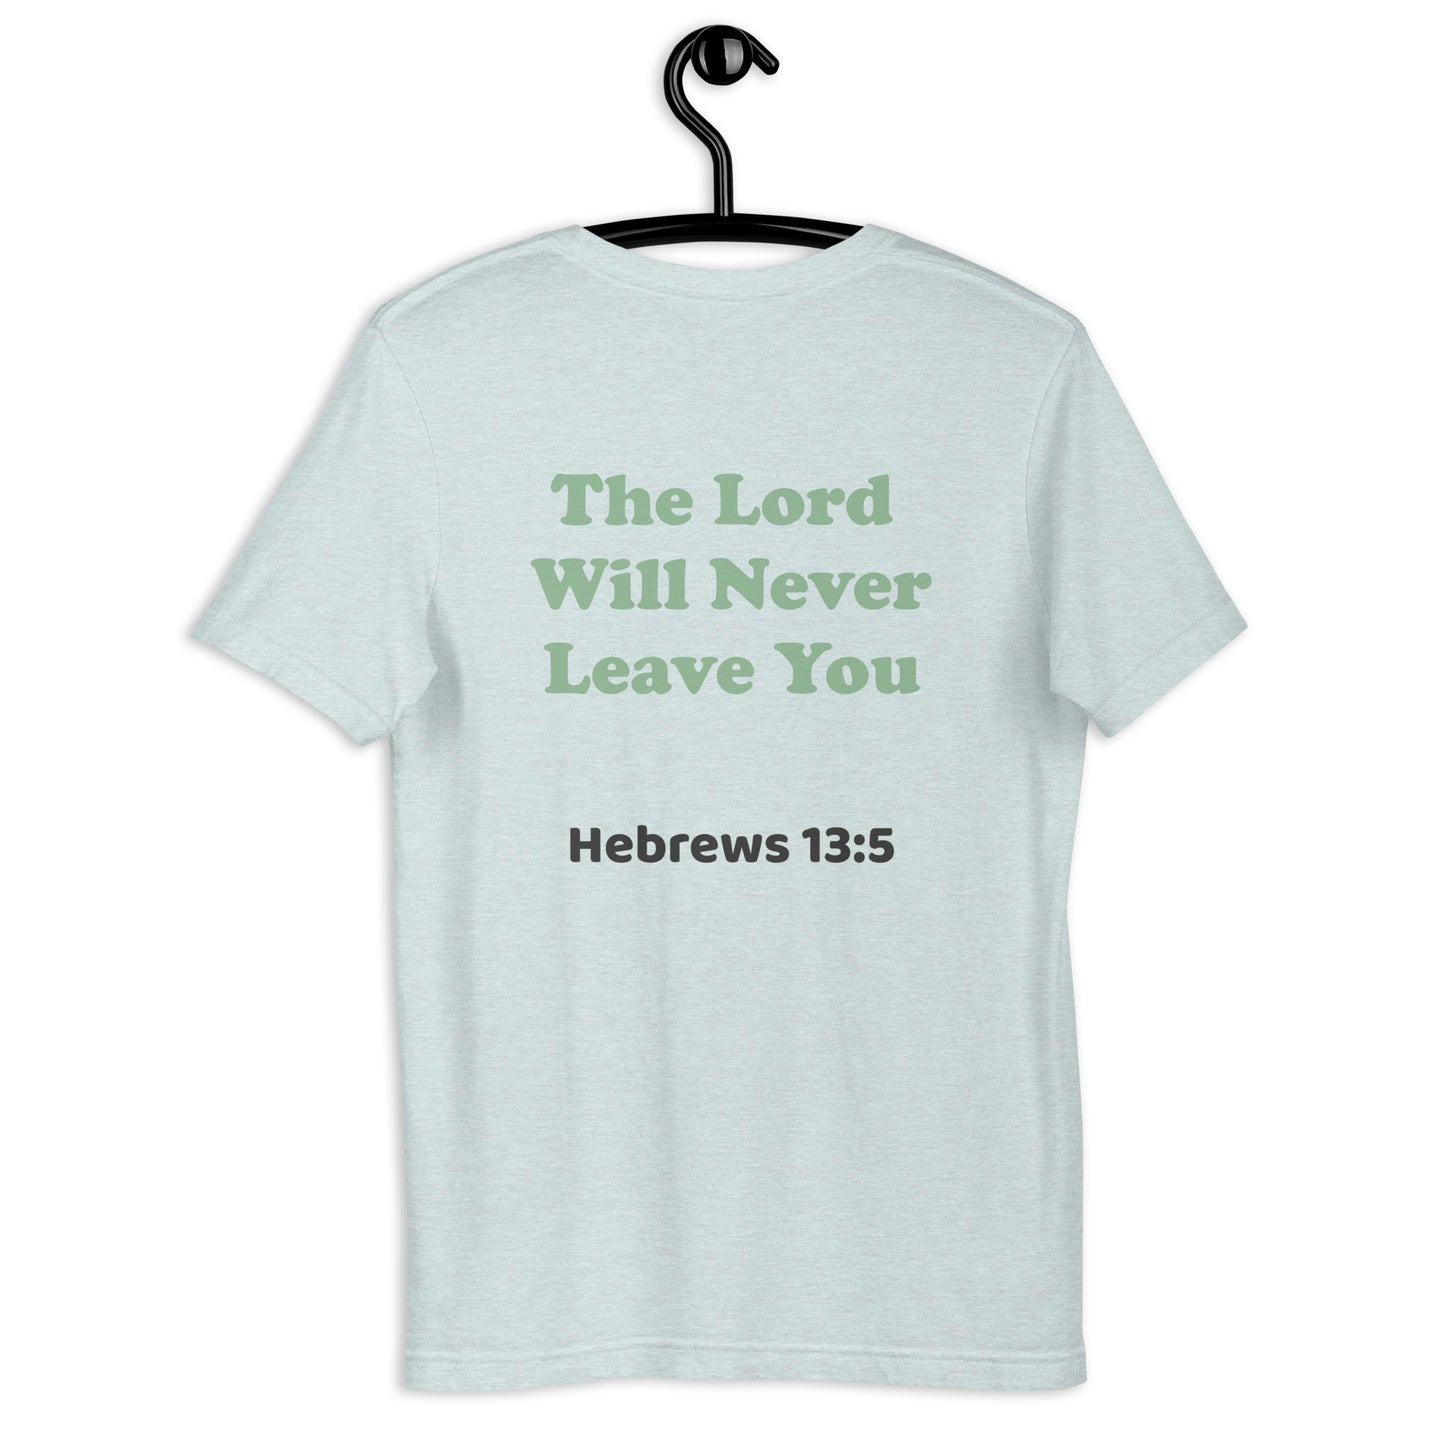 The Lord will Never Leave you T shirt